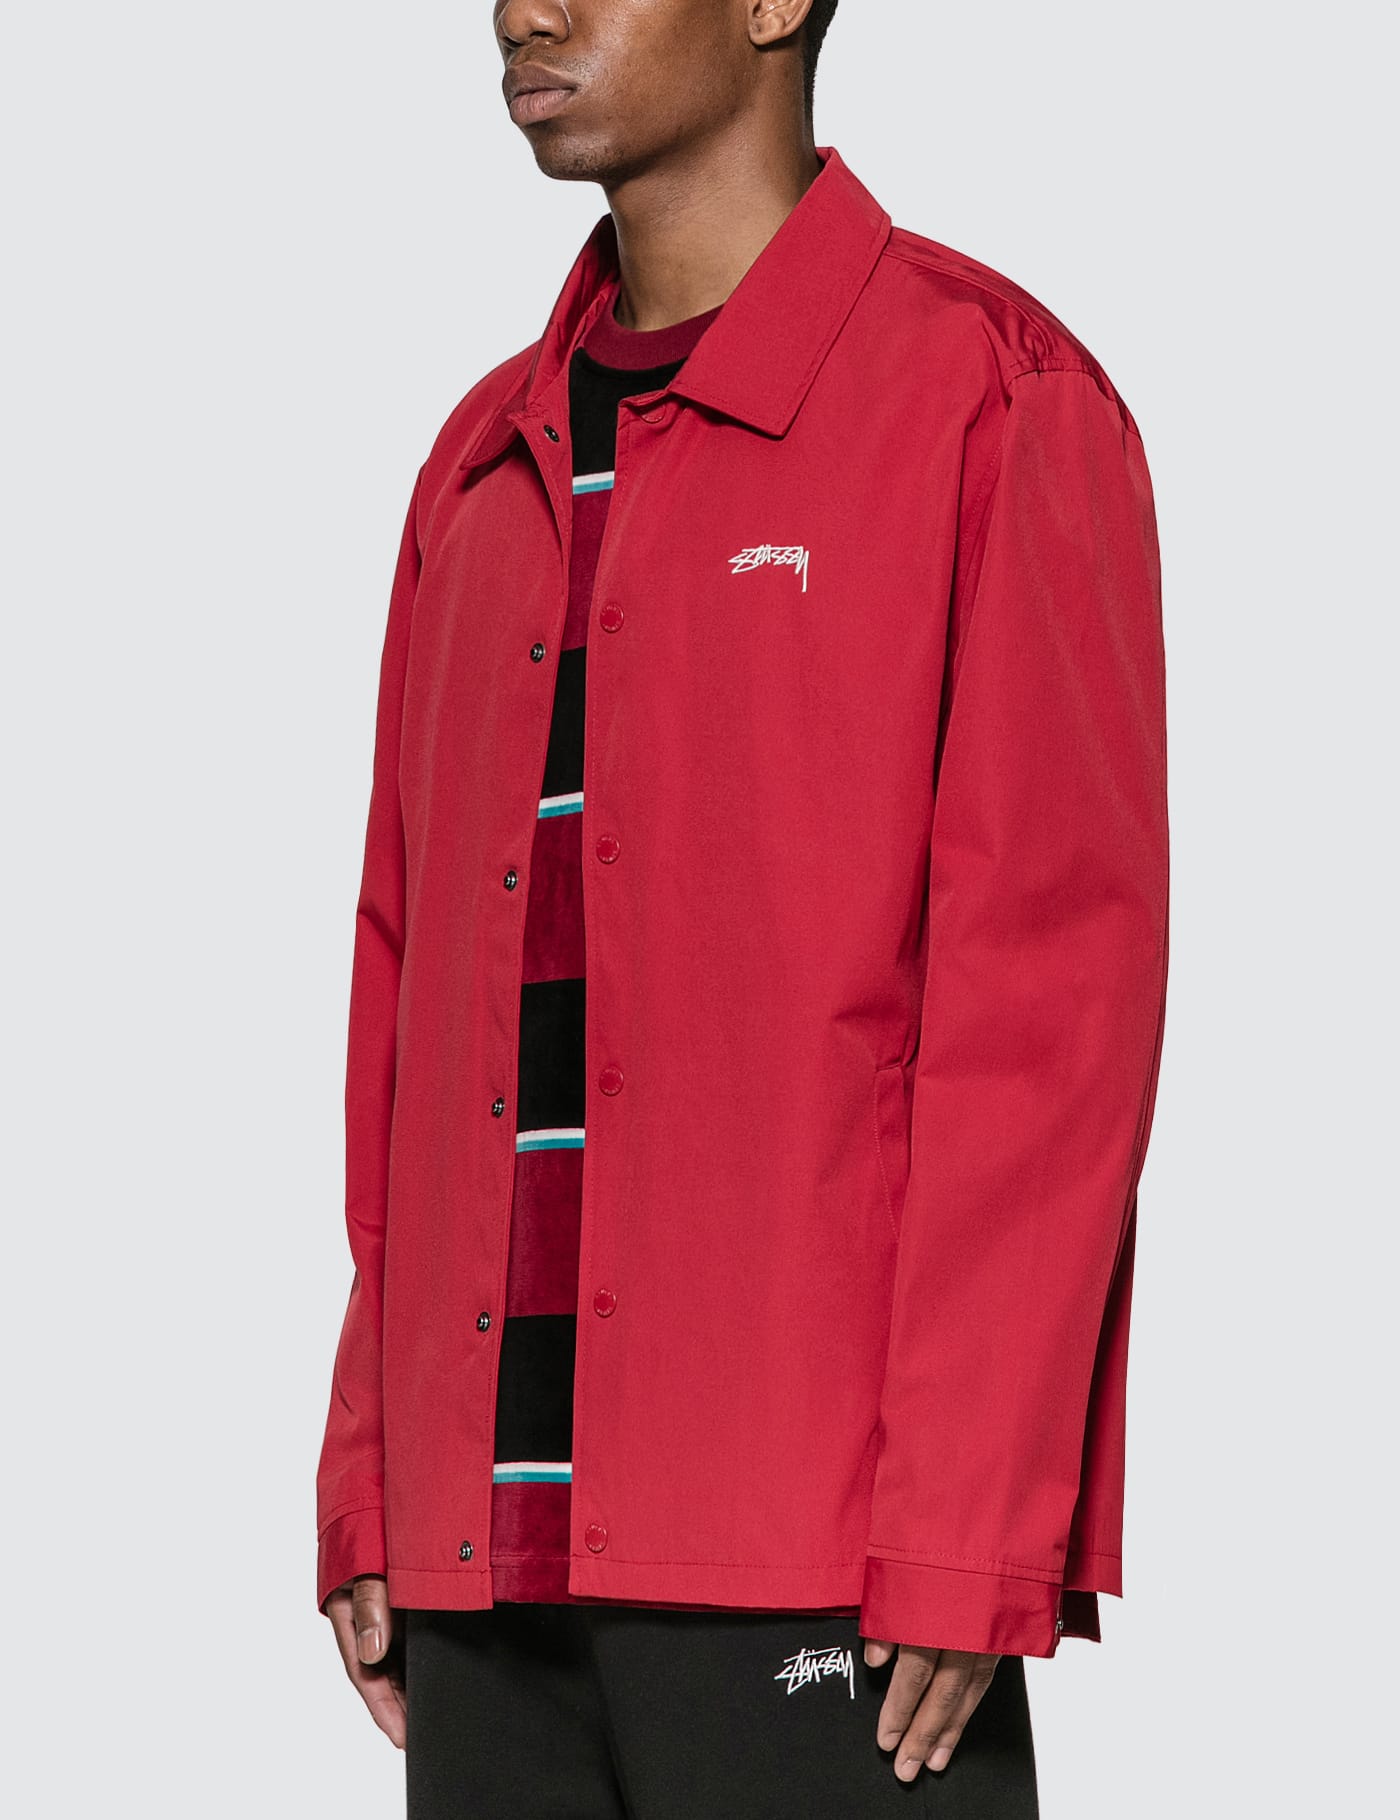 Stussy - Classic Coach Jacket | HBX - Globally Curated Fashion and 